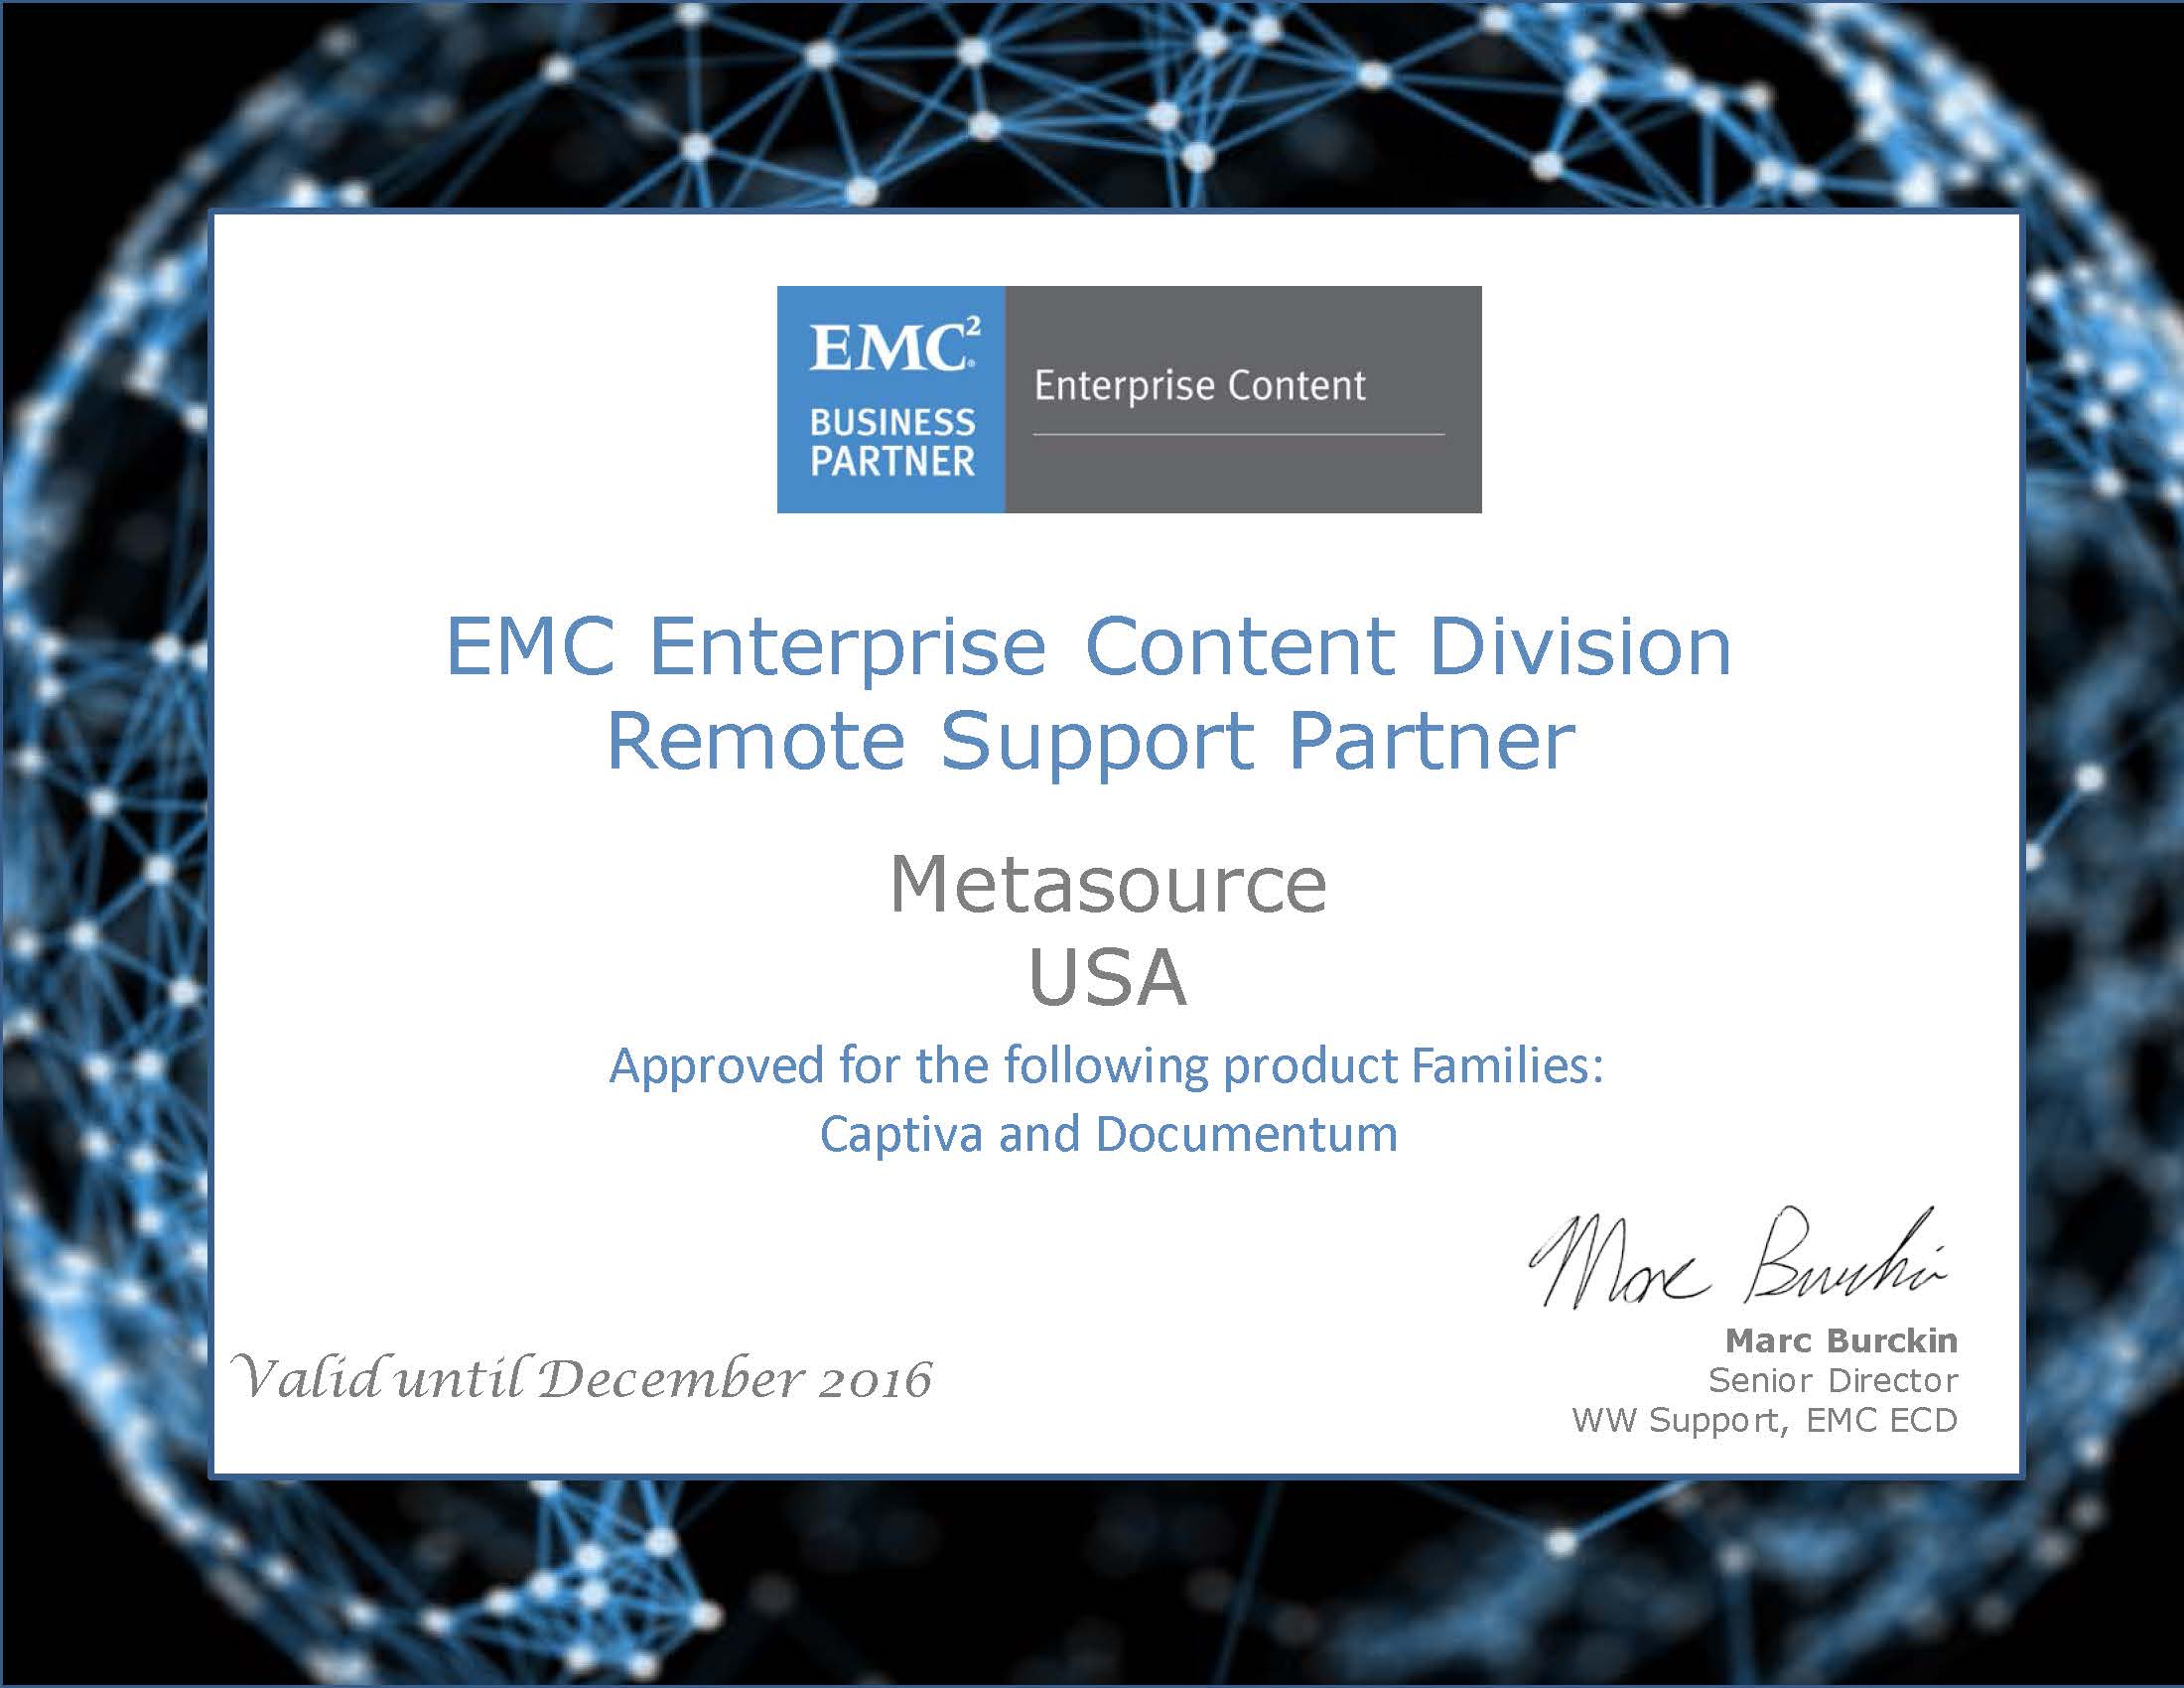 MetaSource Recognized as an EMC Remote Support Partner